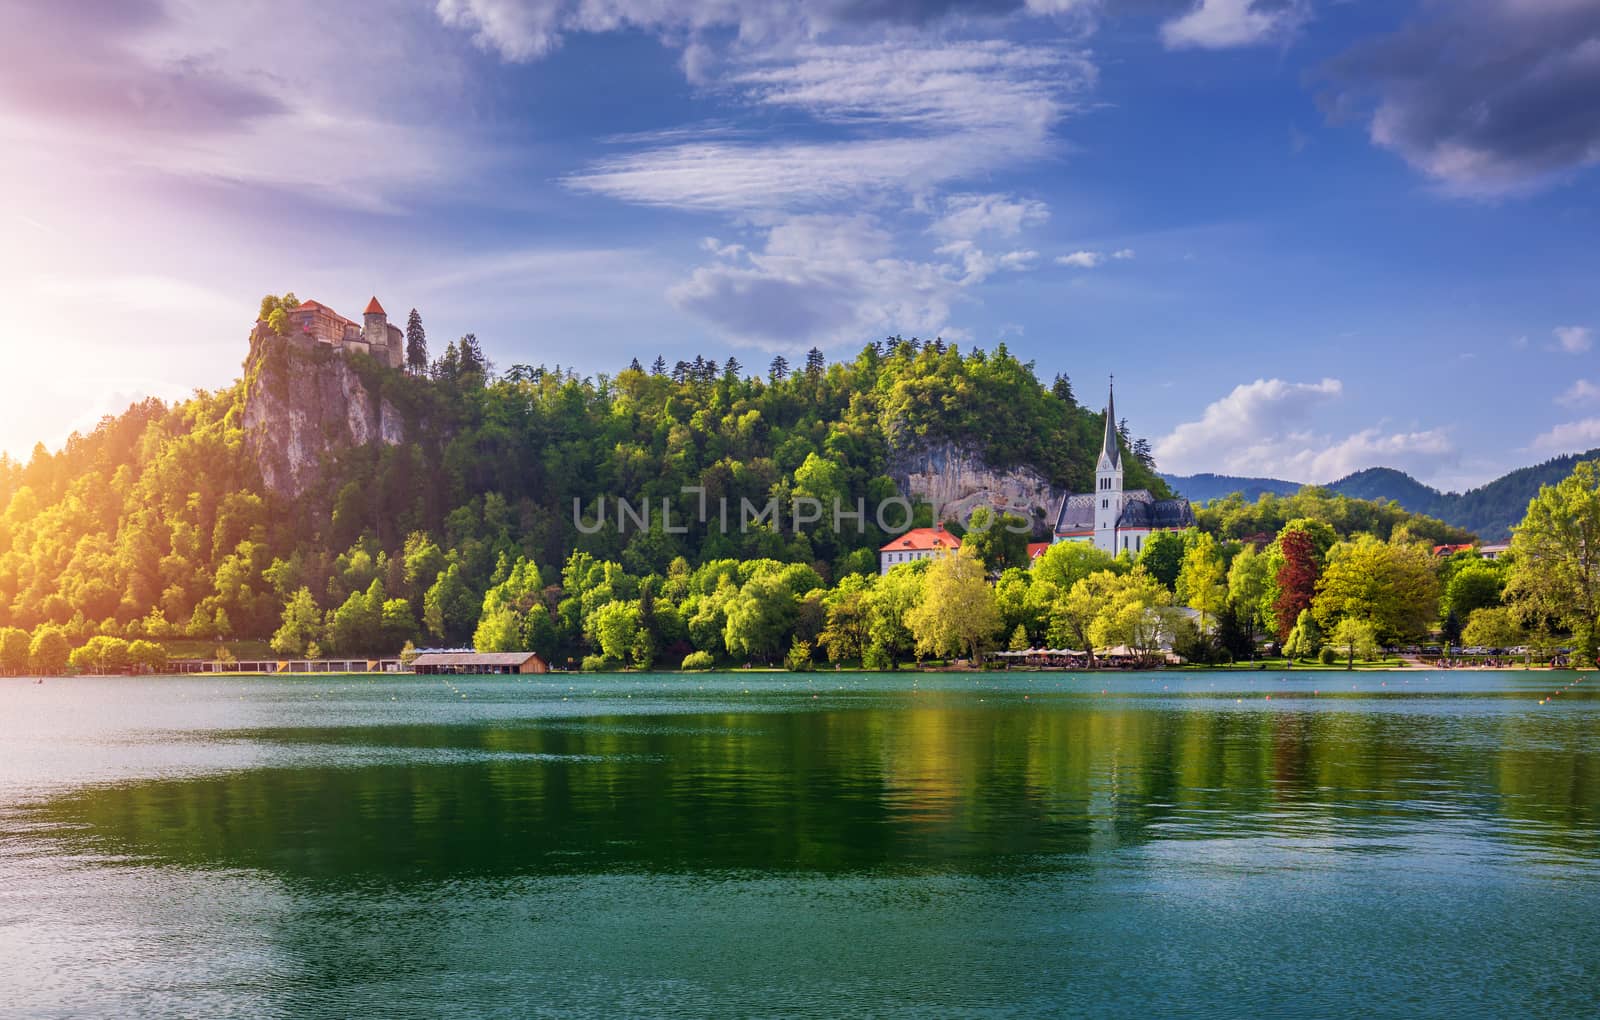 Amazing sunny scenery of Bled castle and St. Martin's Church and Bled town with reflection in the lake and the Julian Alps on background. Bled Lake, Slovenia.